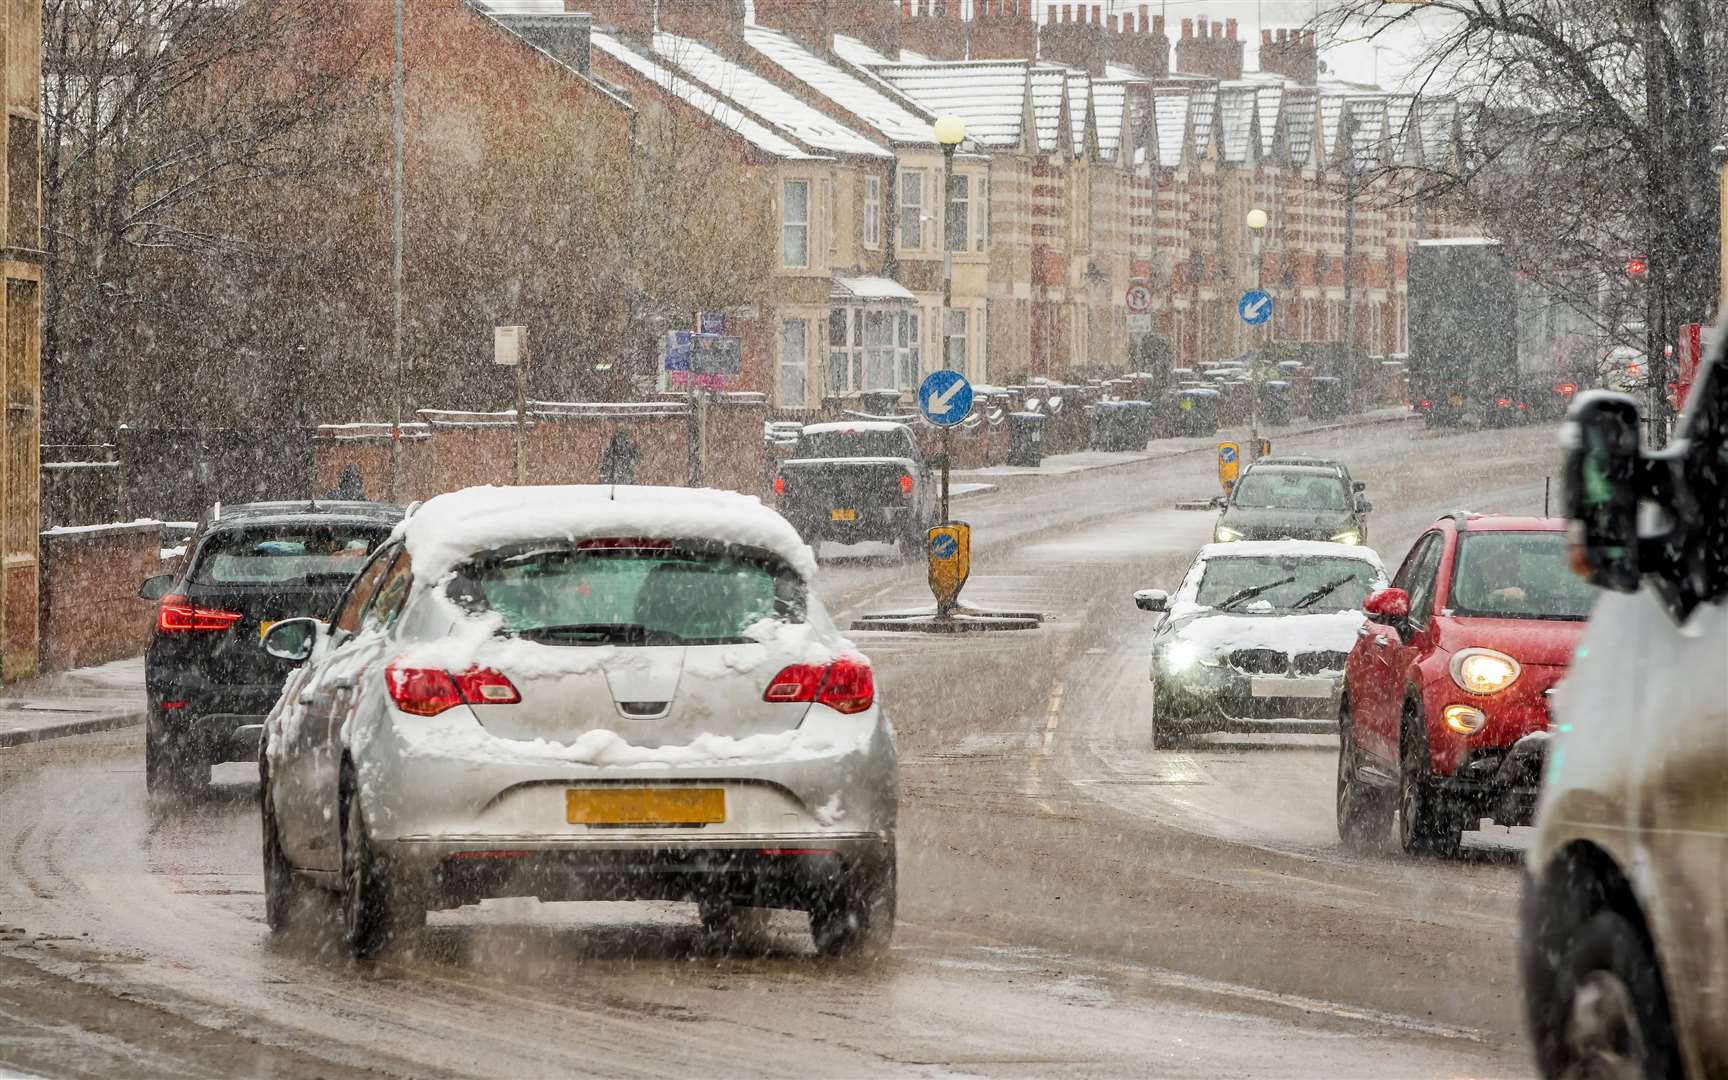 Drivers are being advised to travel with essential items in their car. Image: iStock.